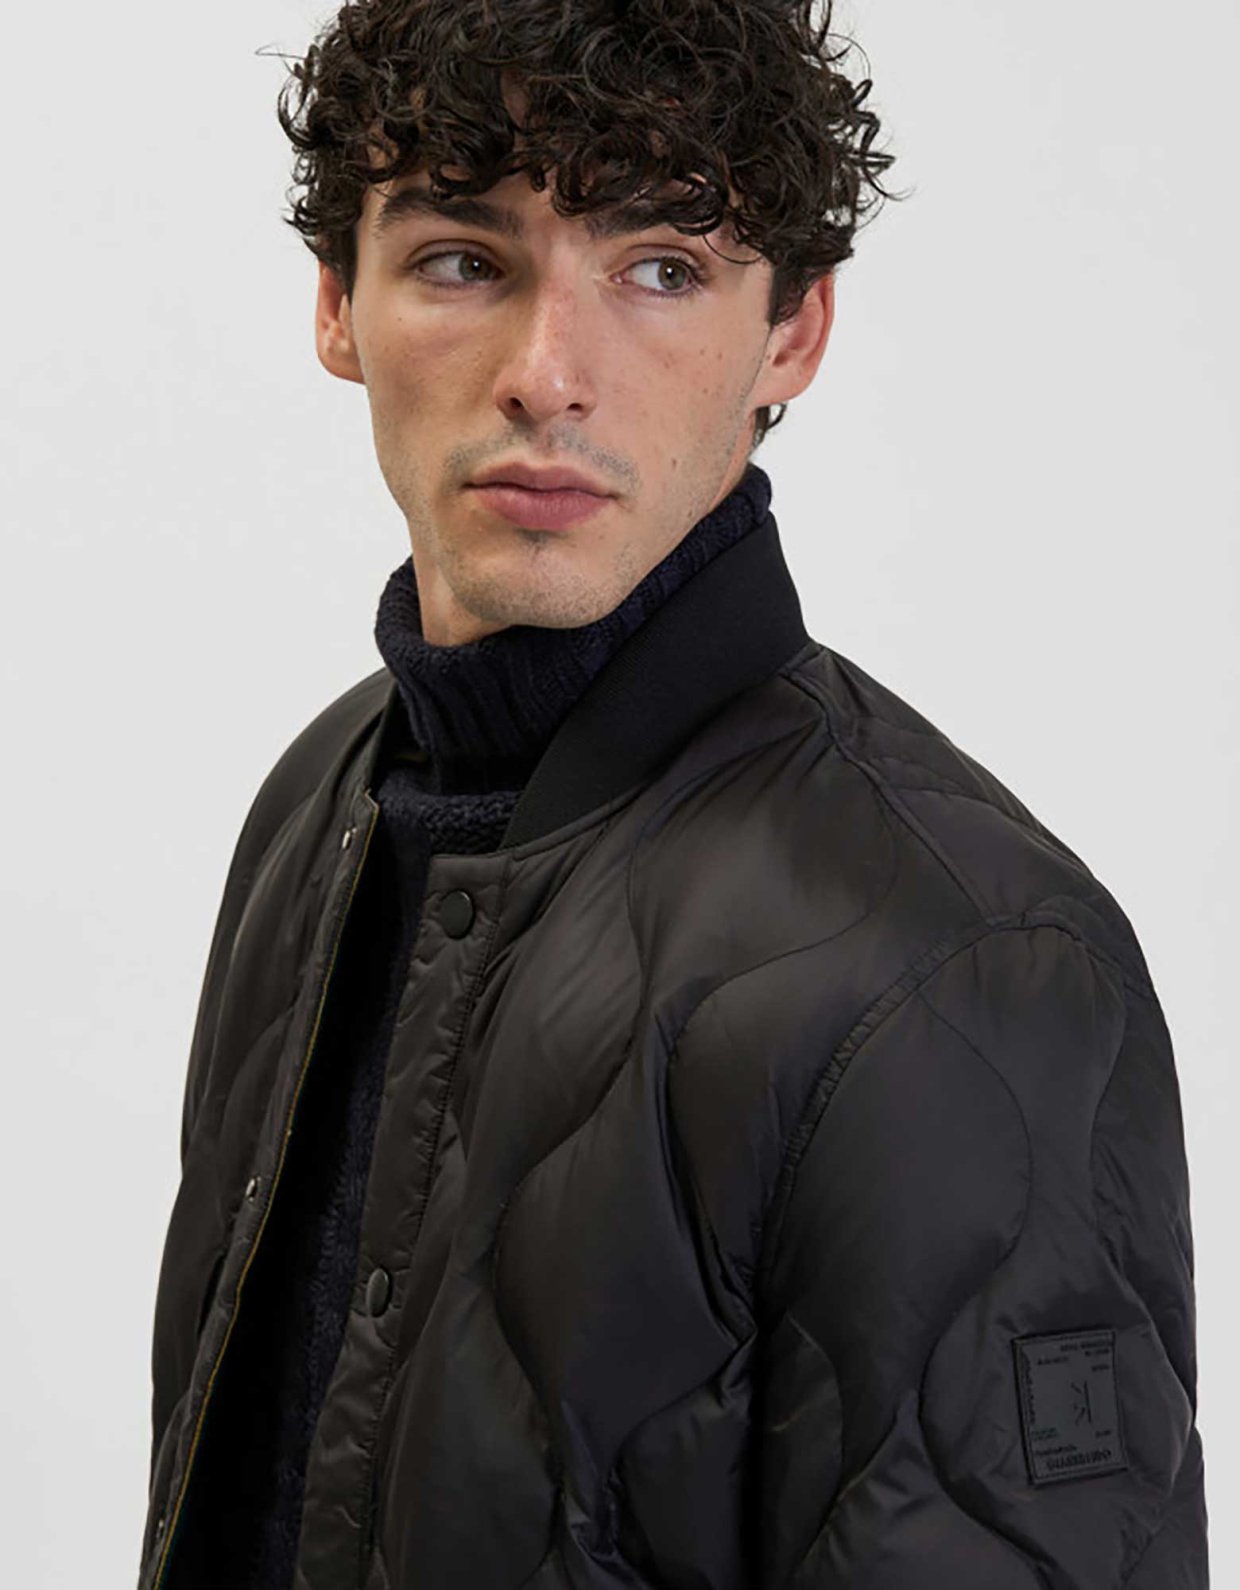 Gianni Lupo Quilted bomber jacket black